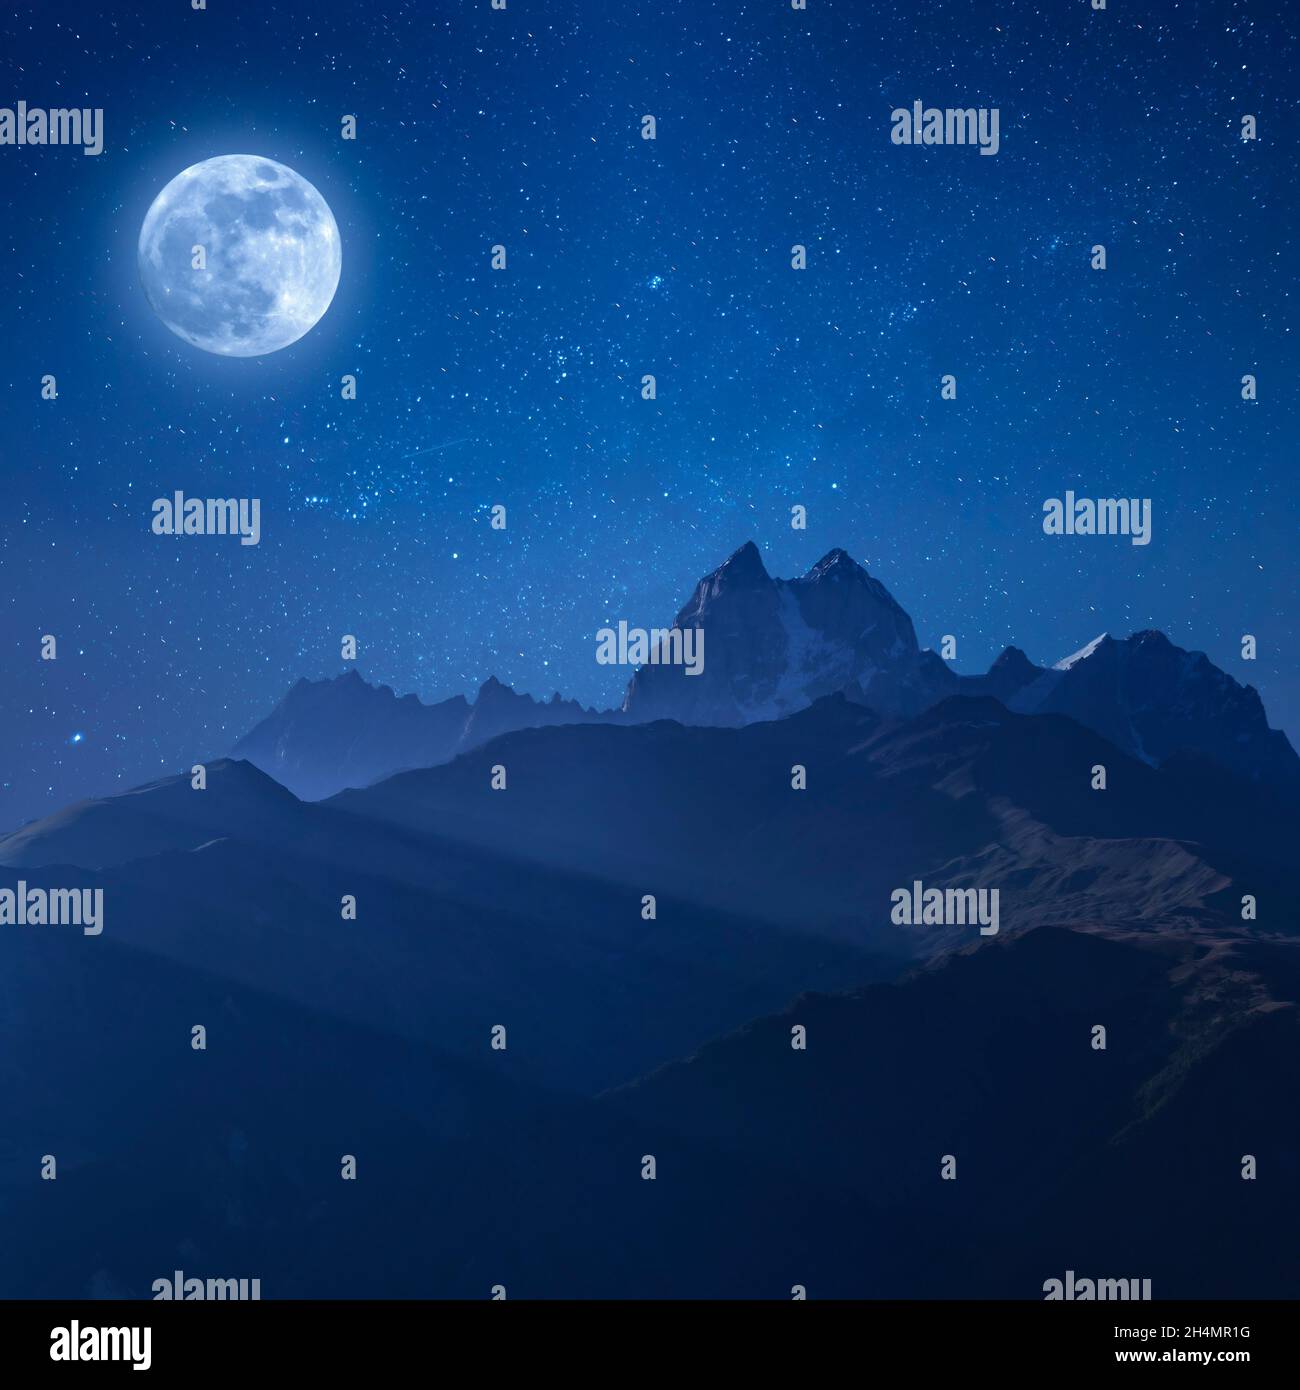 Night landscape with mountains and full moon, bright stars in endless galaxy Stock Photo